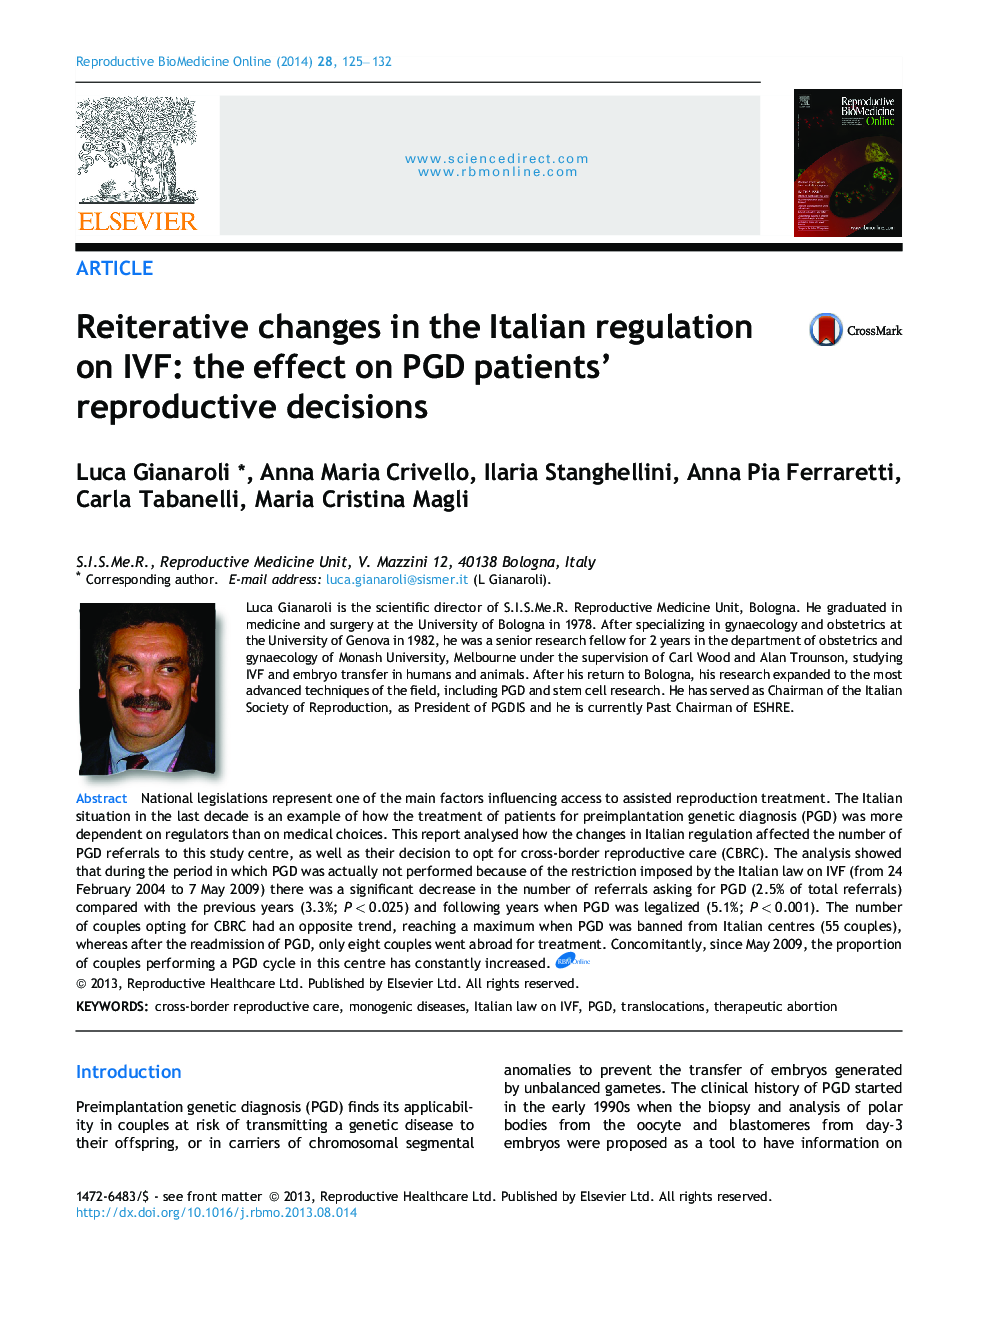 Reiterative changes in the Italian regulation on IVF: the effect on PGD patients’ reproductive decisions 